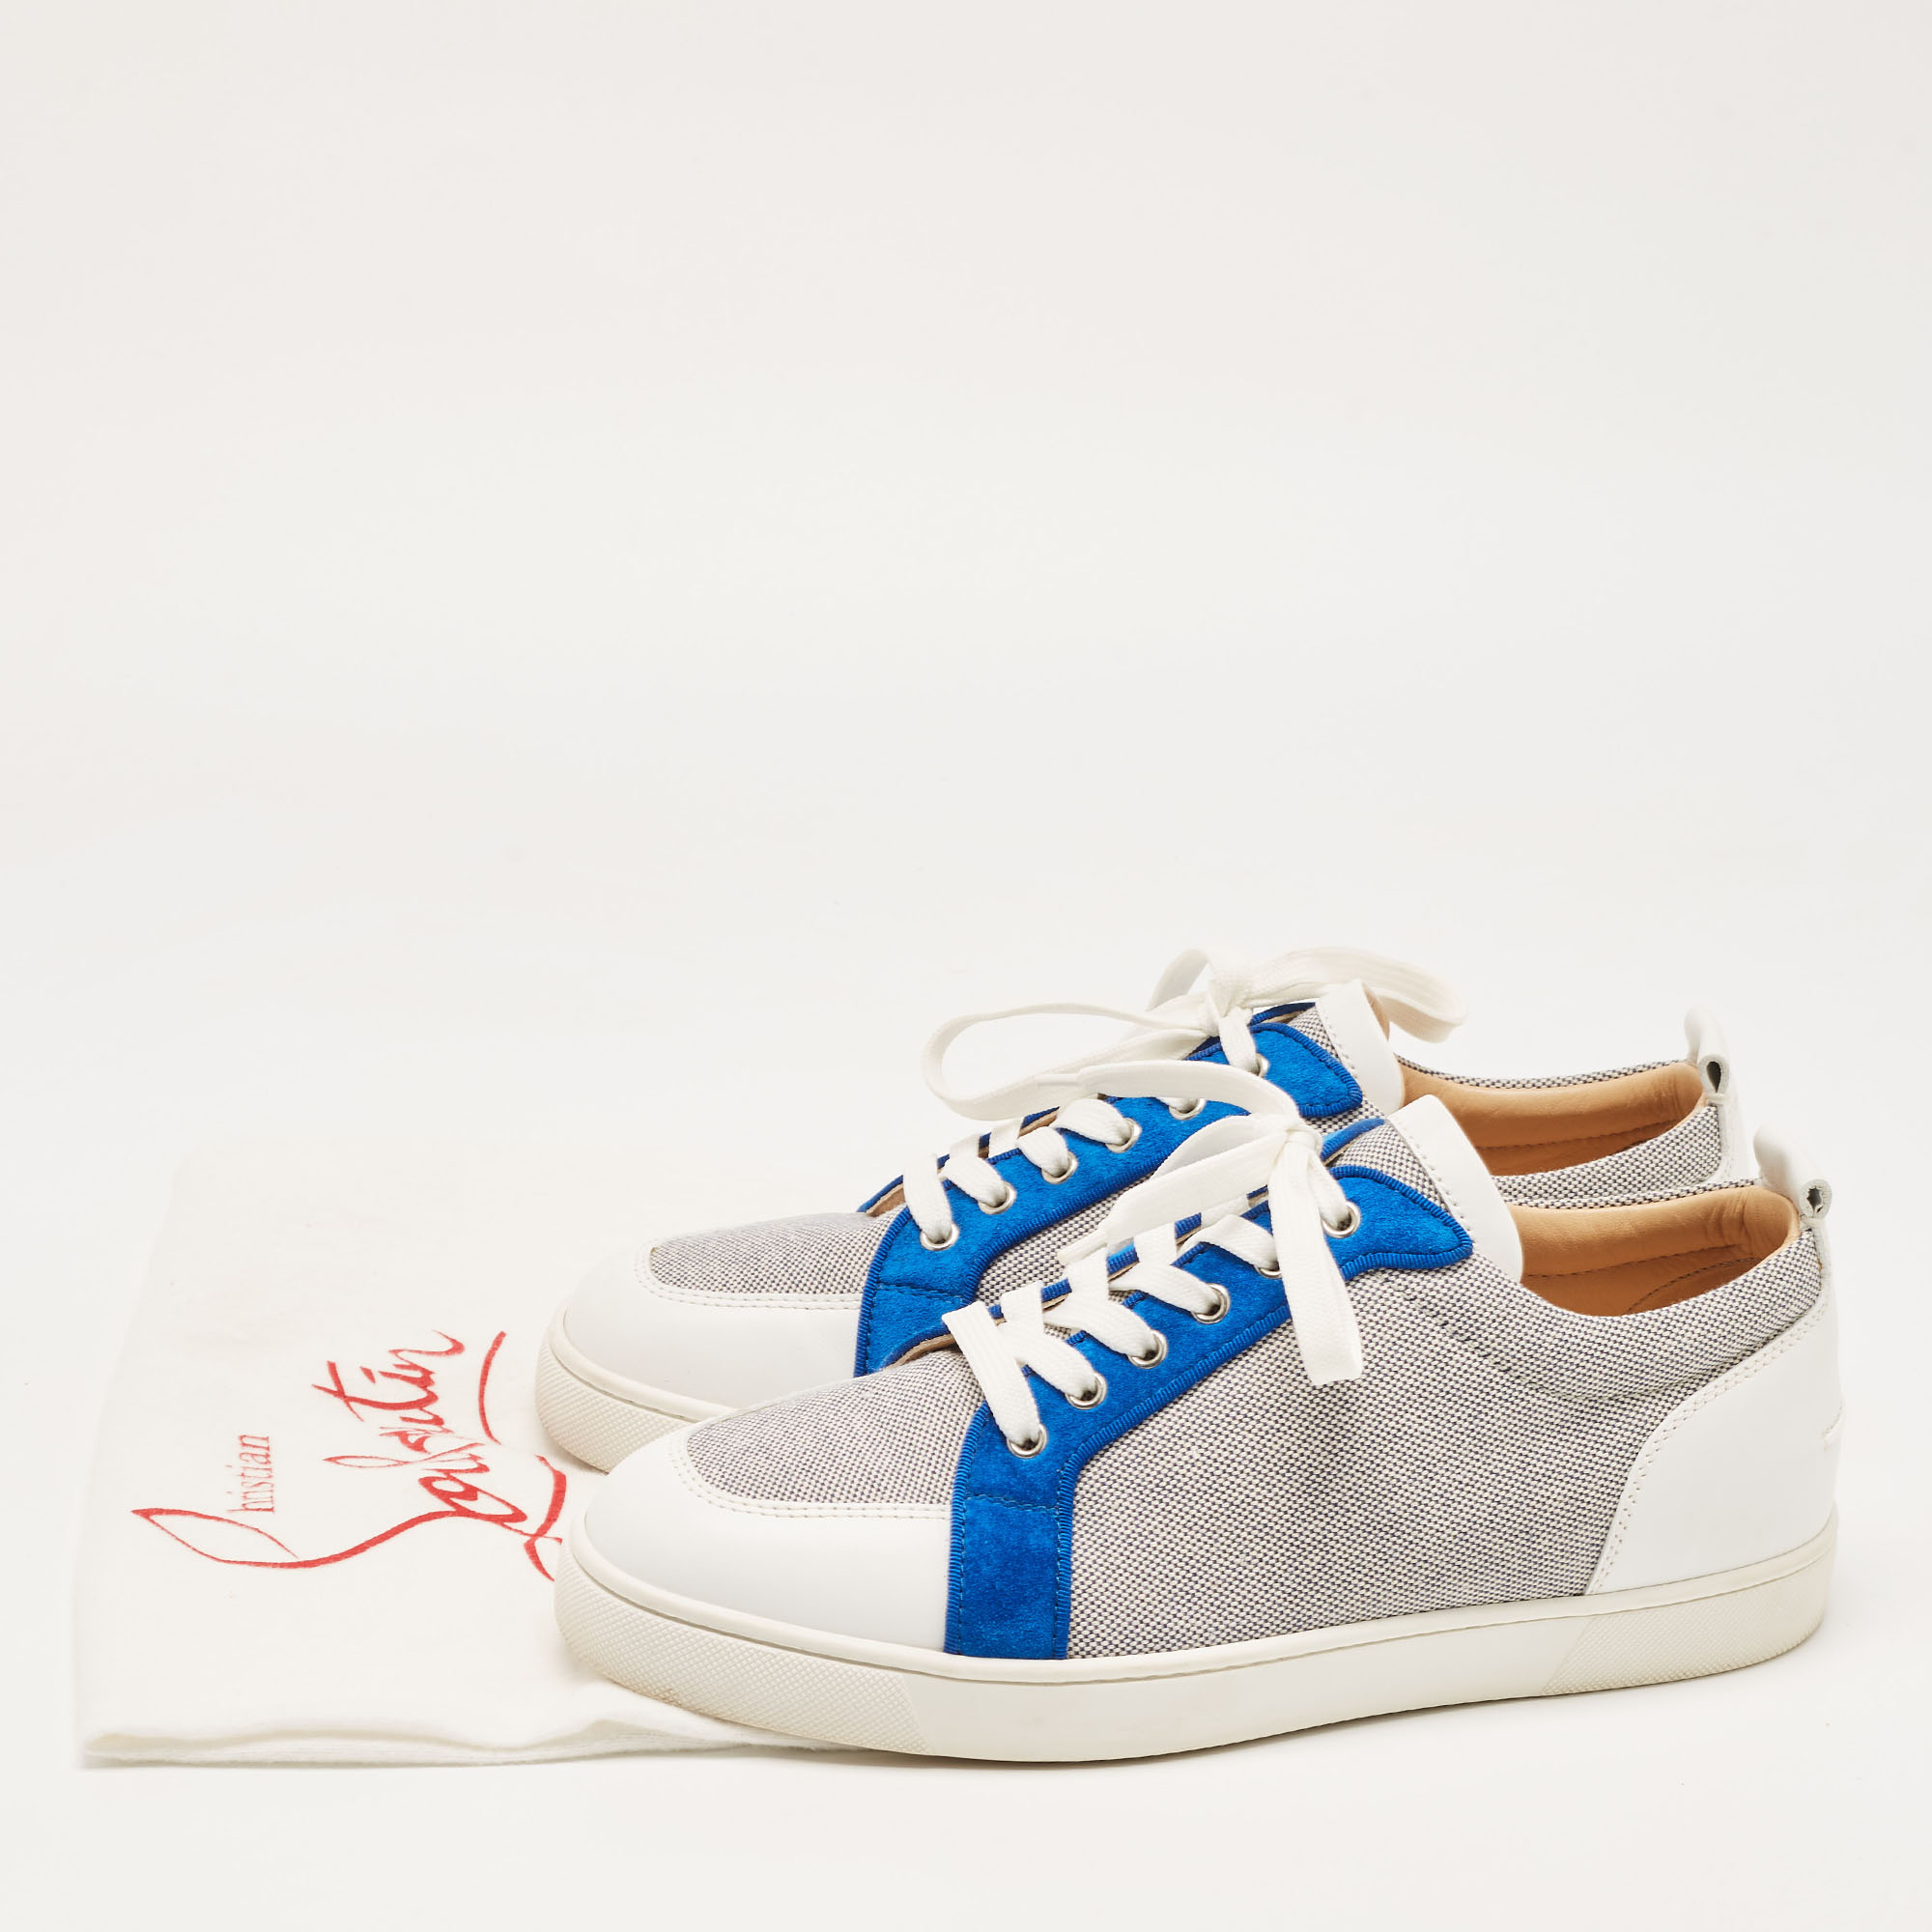 Christian Louboutin White/Navy Blue Leather And Woven Fabric Rantulow Low Top Sneakers Size 44